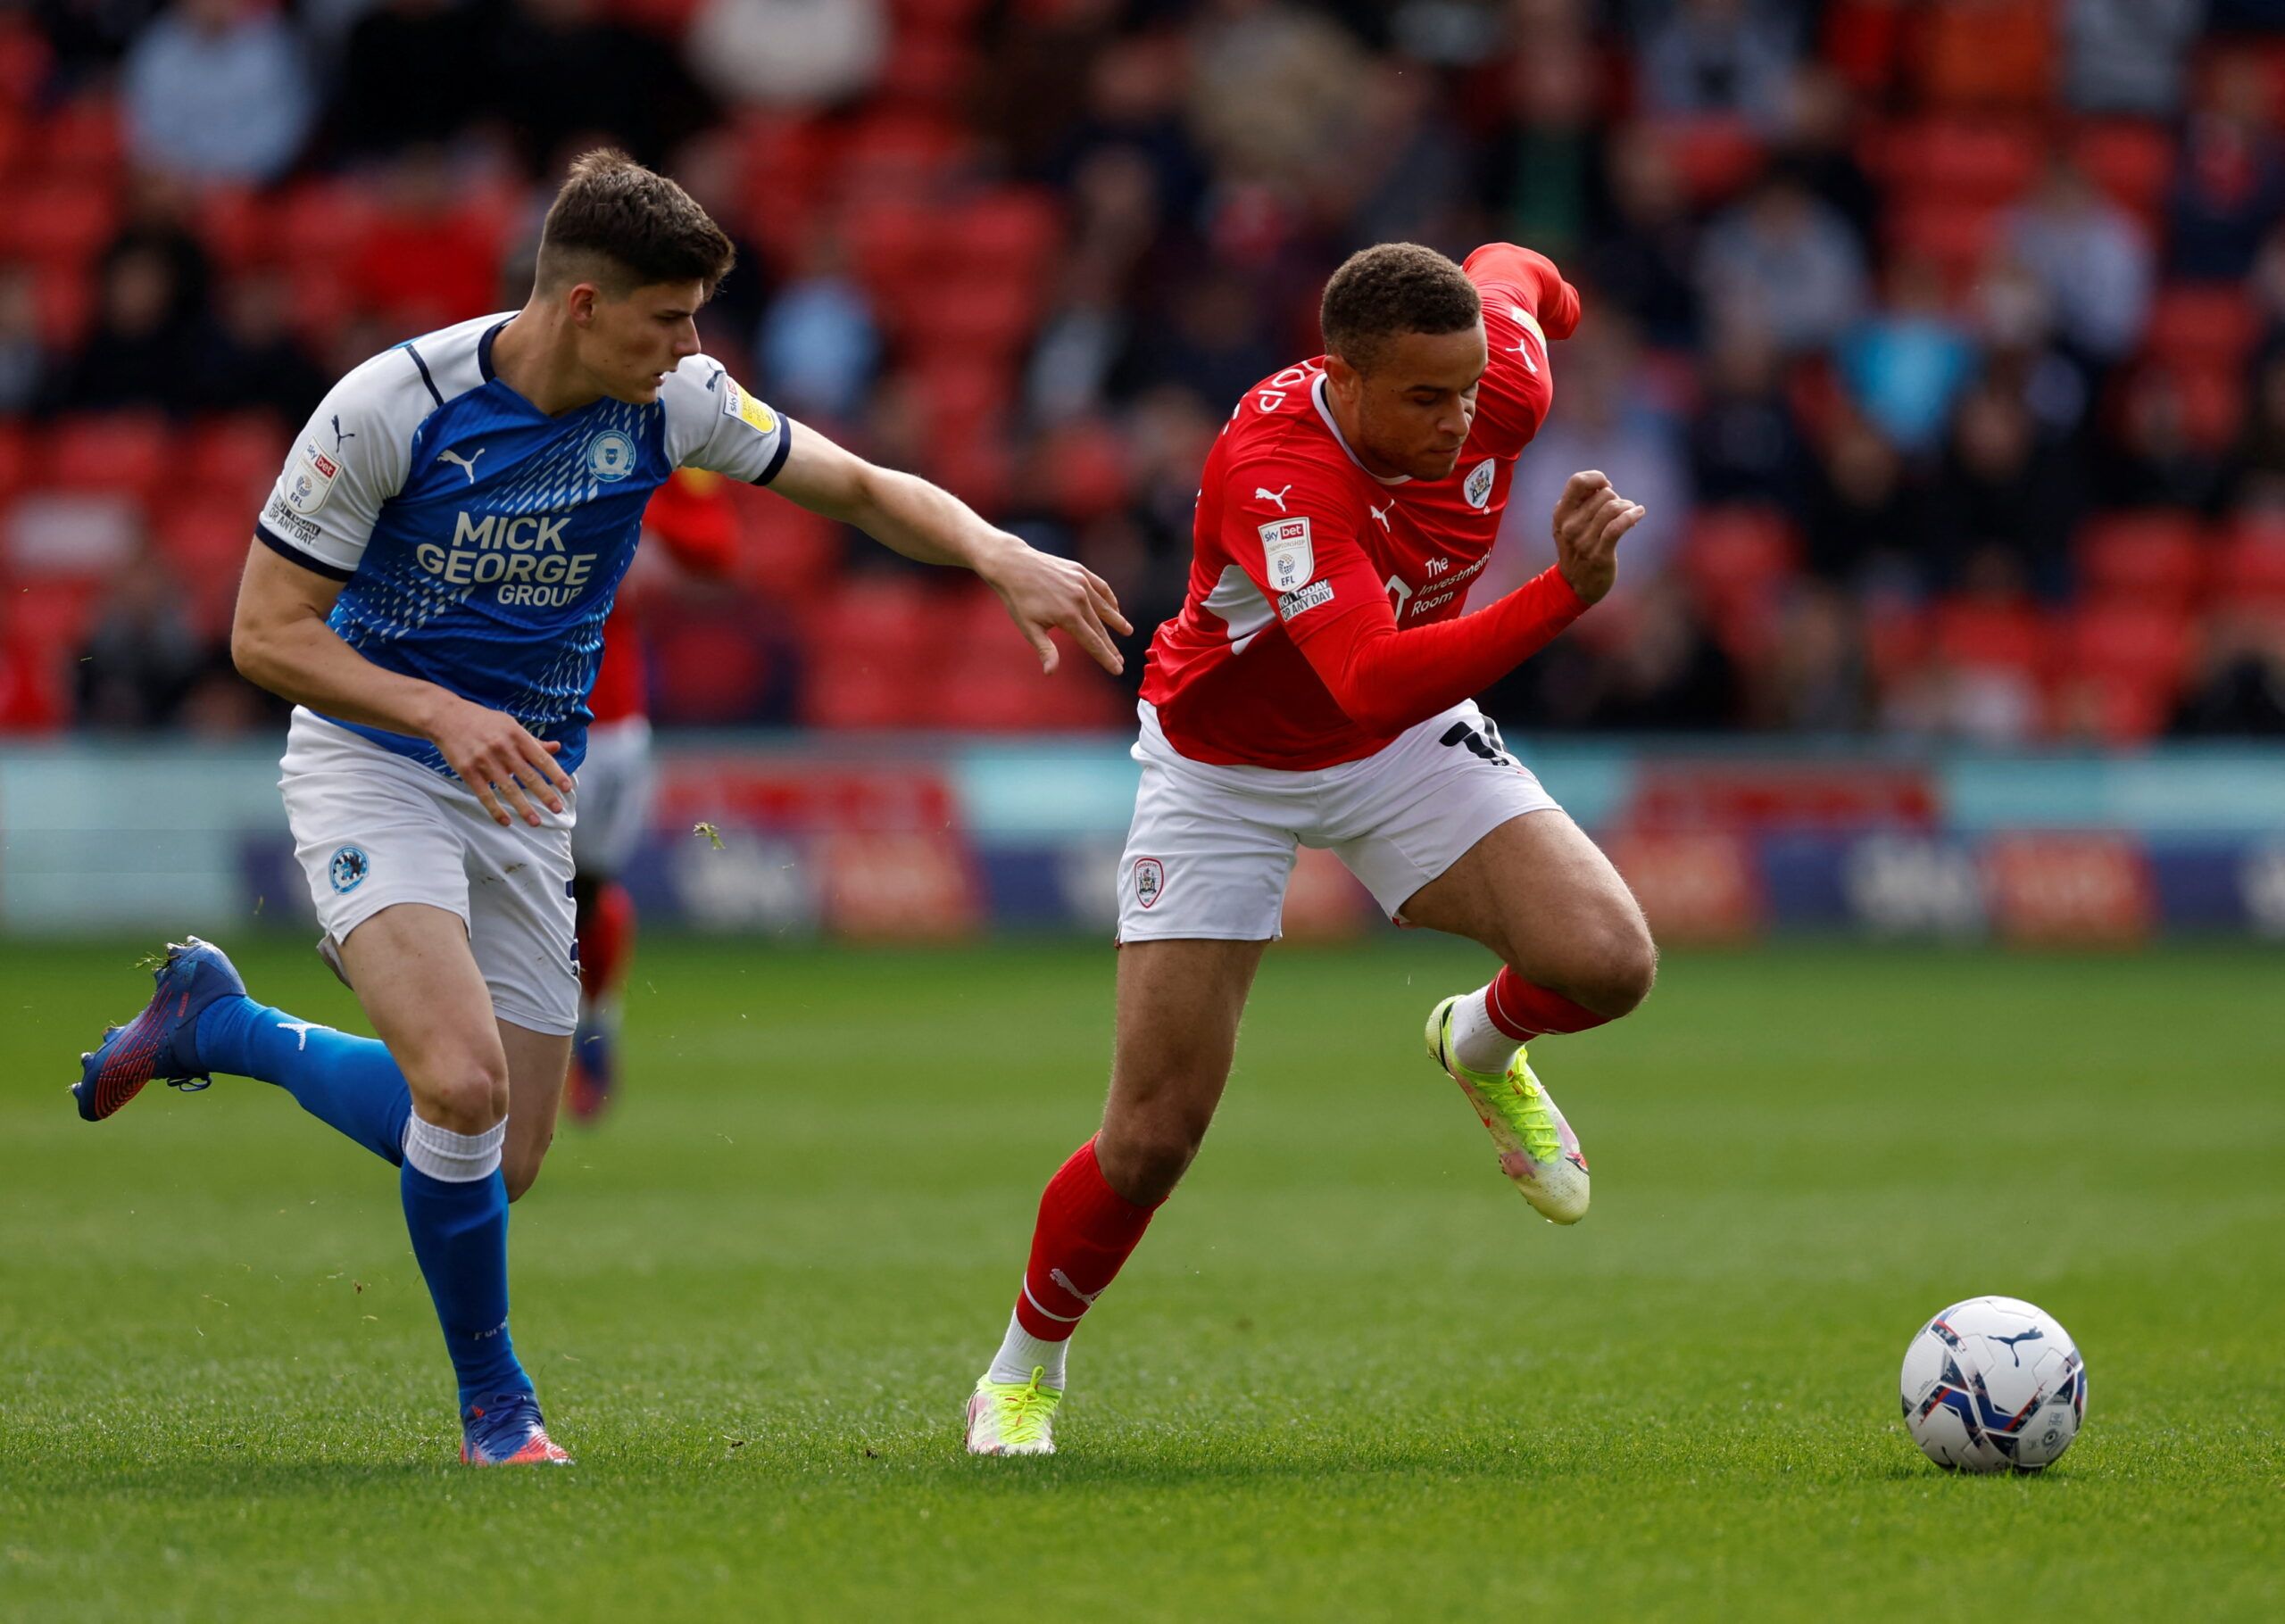 Soccer Football - Championship - Barnsley v Peterborough United - Oakwell, Barnsley, Britain - April 18, 2022 Peterborough United's Ronnie Edwards in action with Barnsley's Carlton Morris  Action Images/Jason Cairnduff  EDITORIAL USE ONLY. No use with unauthorized audio, video, data, fixture lists, club/league logos or 